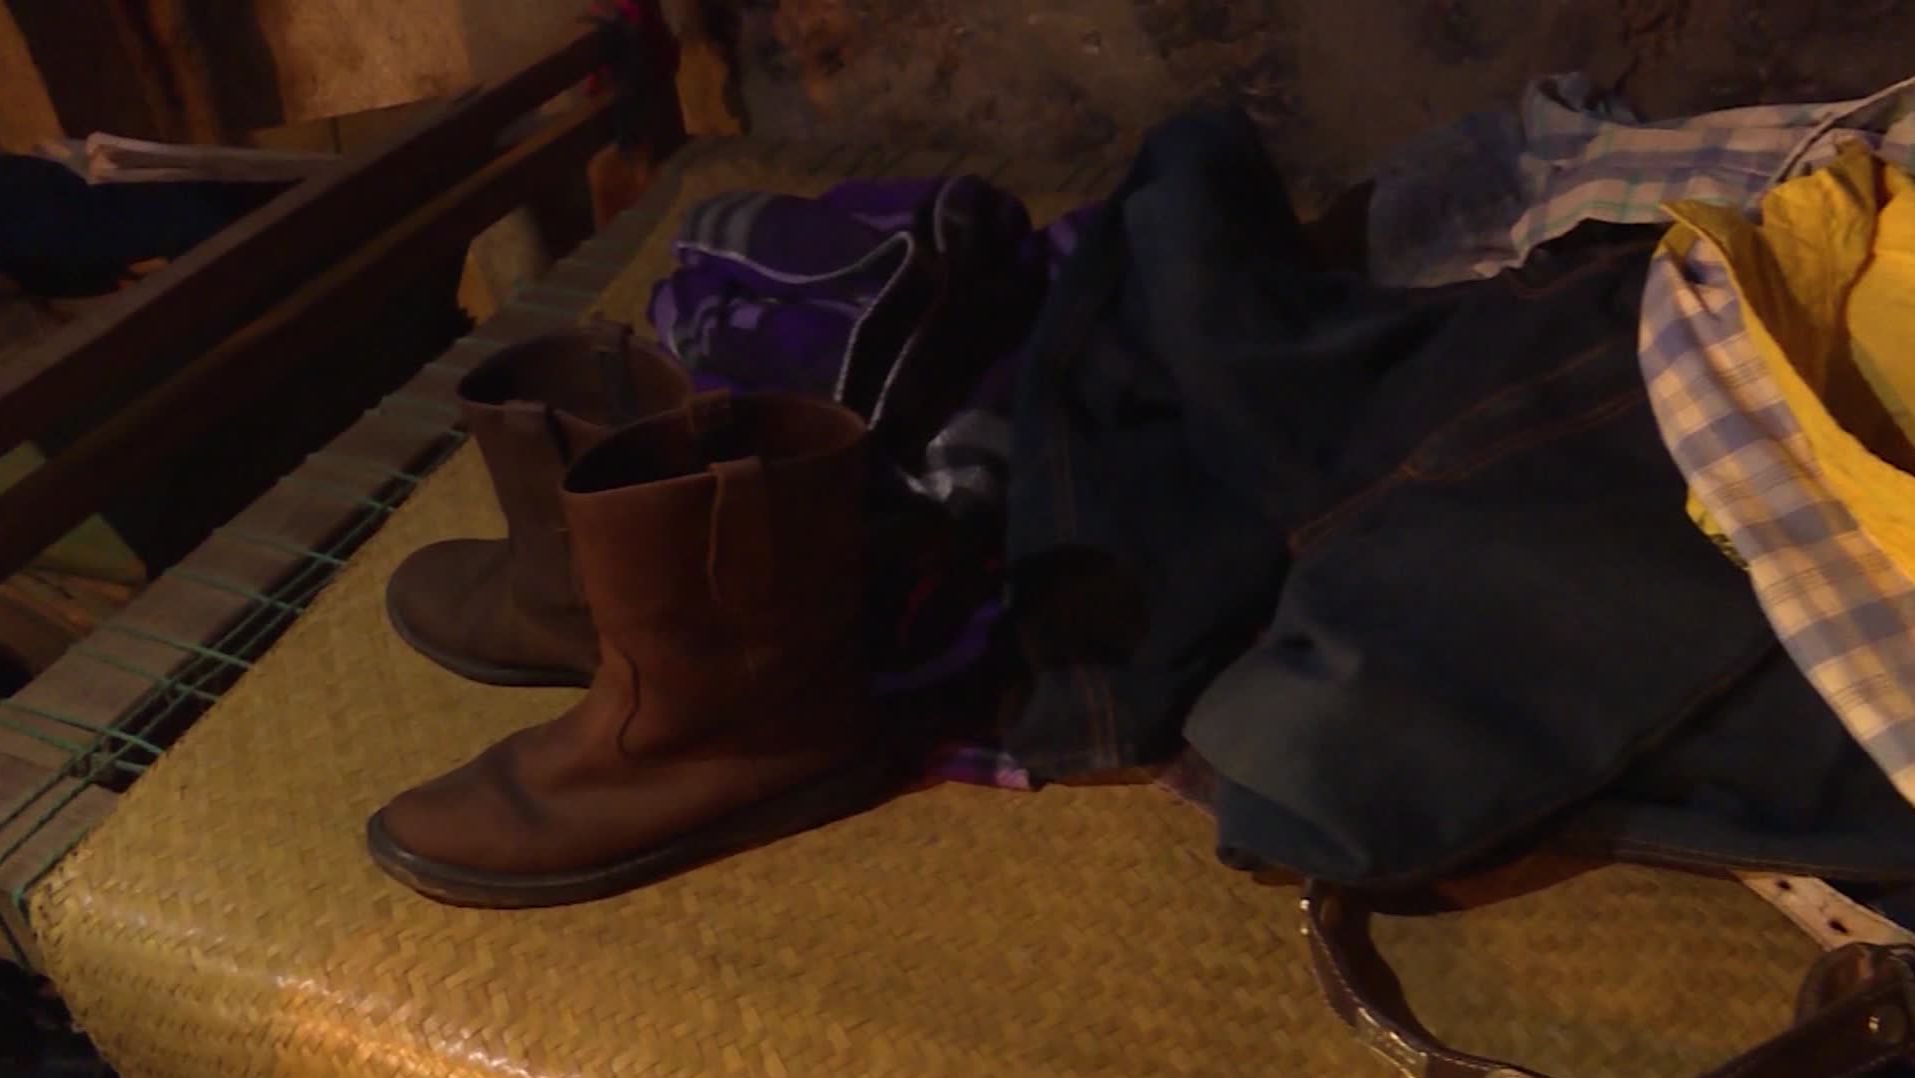 The teen's boots are still sitting on the bed where he left them before he set out in early April.